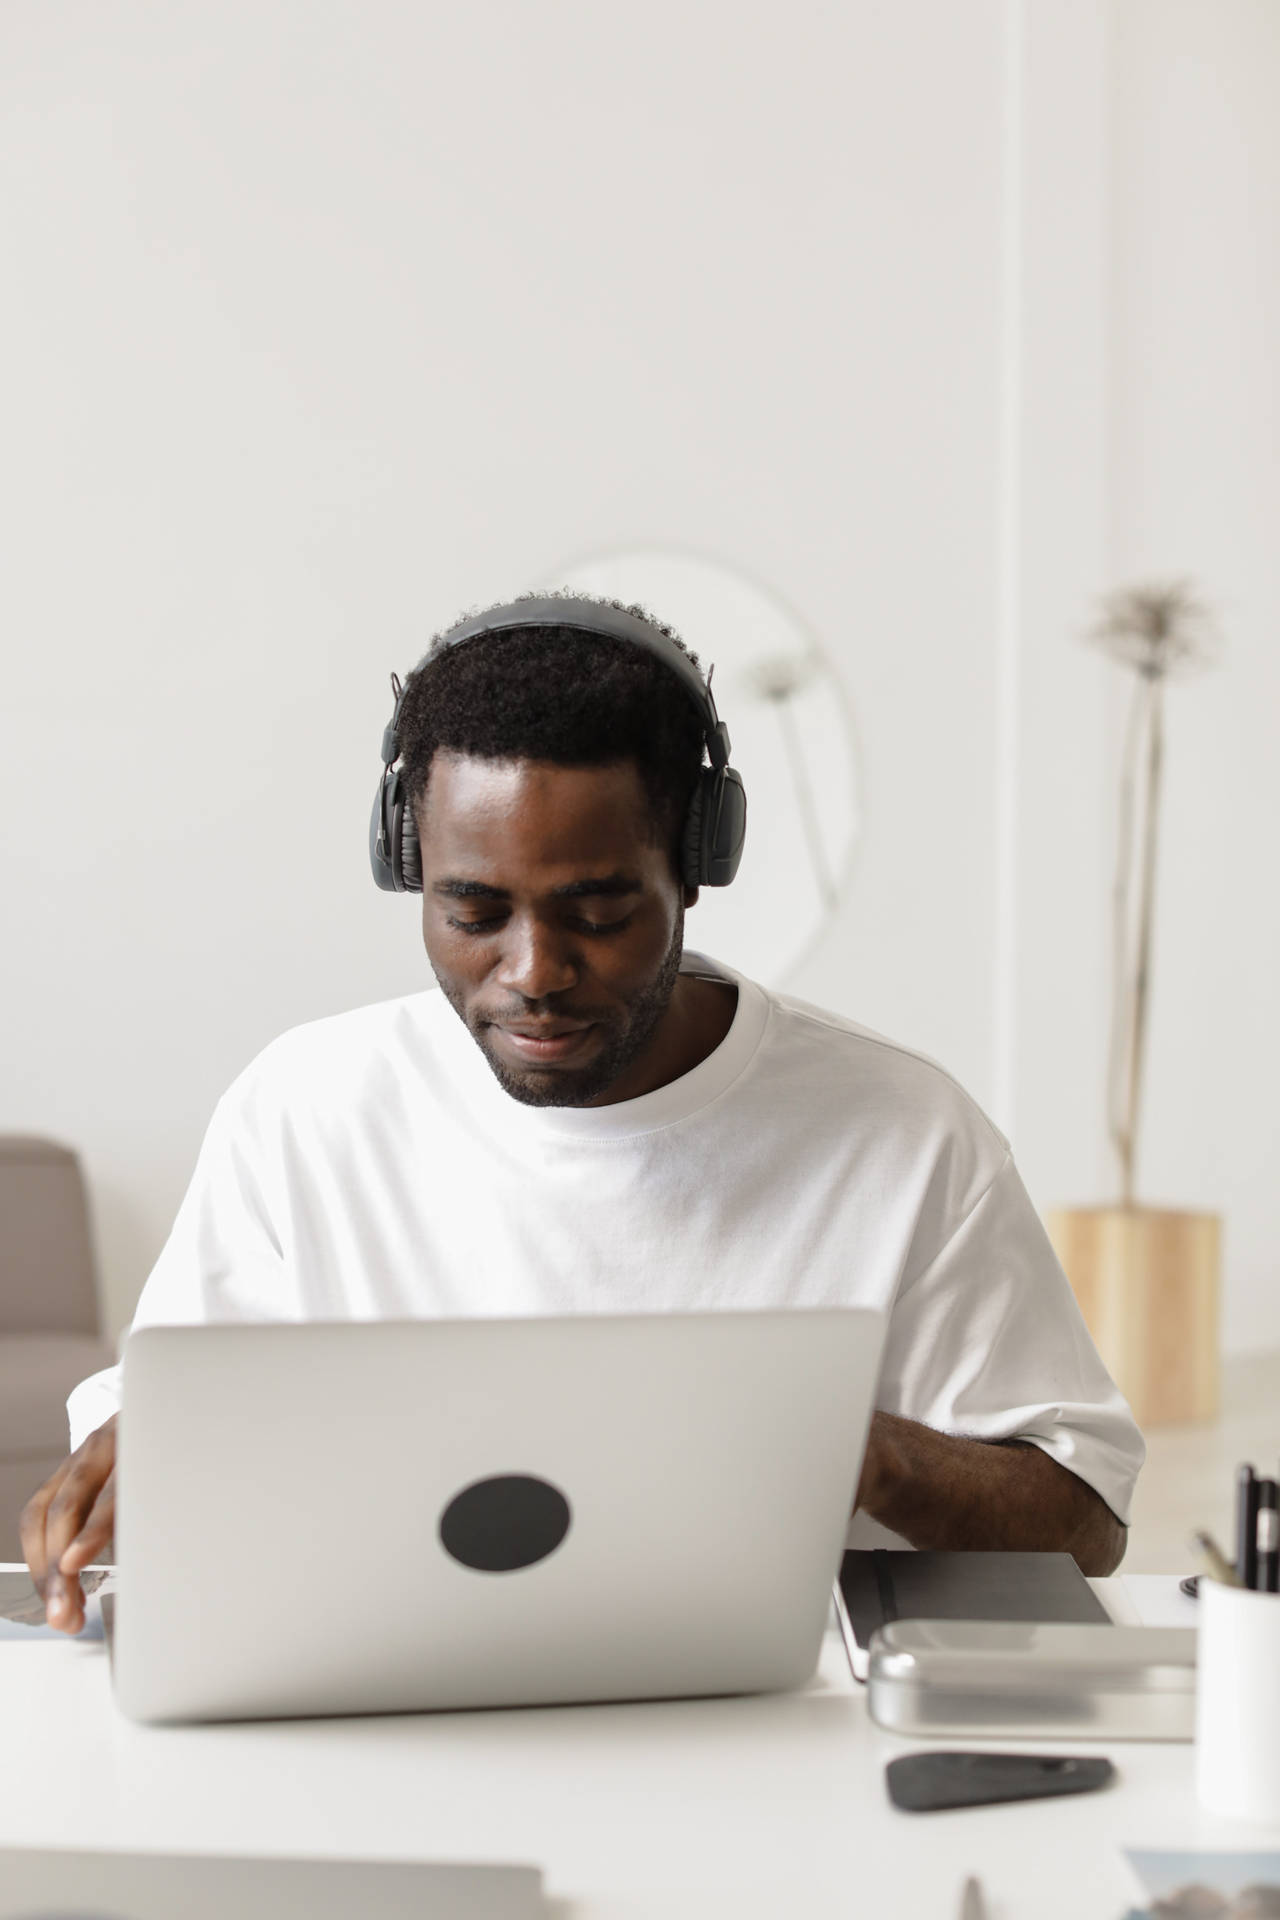 Man With Headphones Creating Content Background